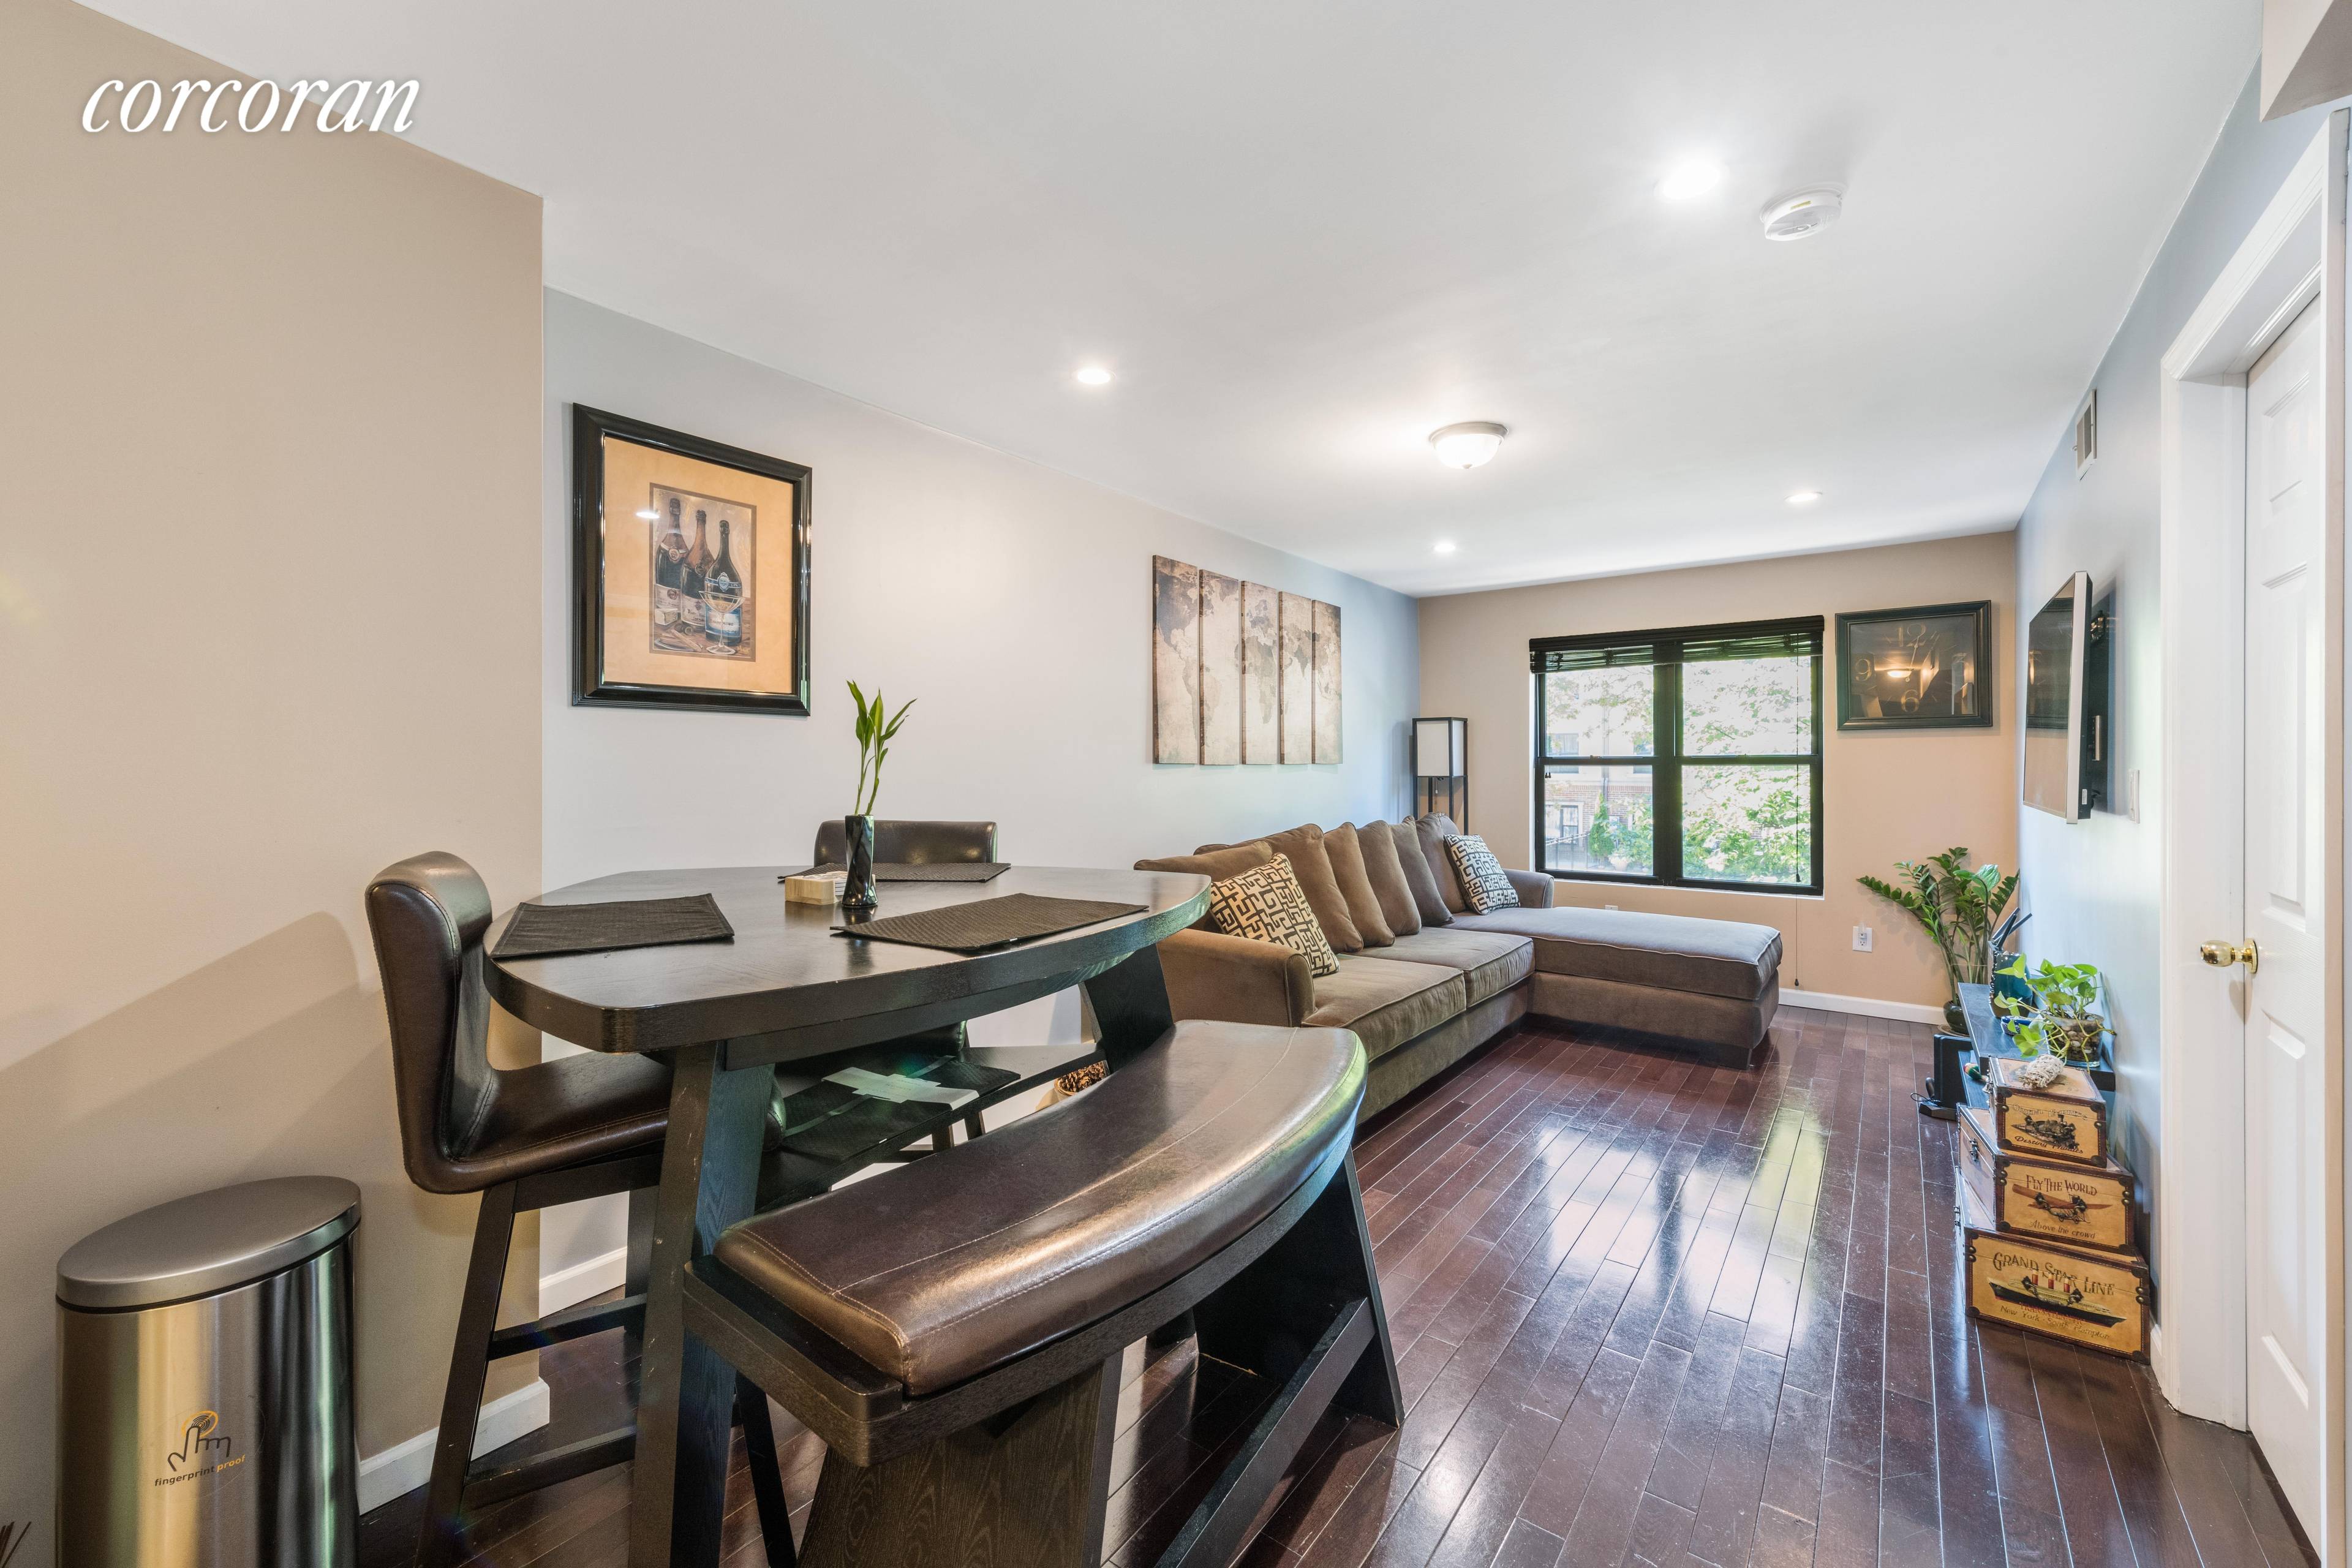 Modern, renovated and affordable three bedroom condominium in Crown Heights.